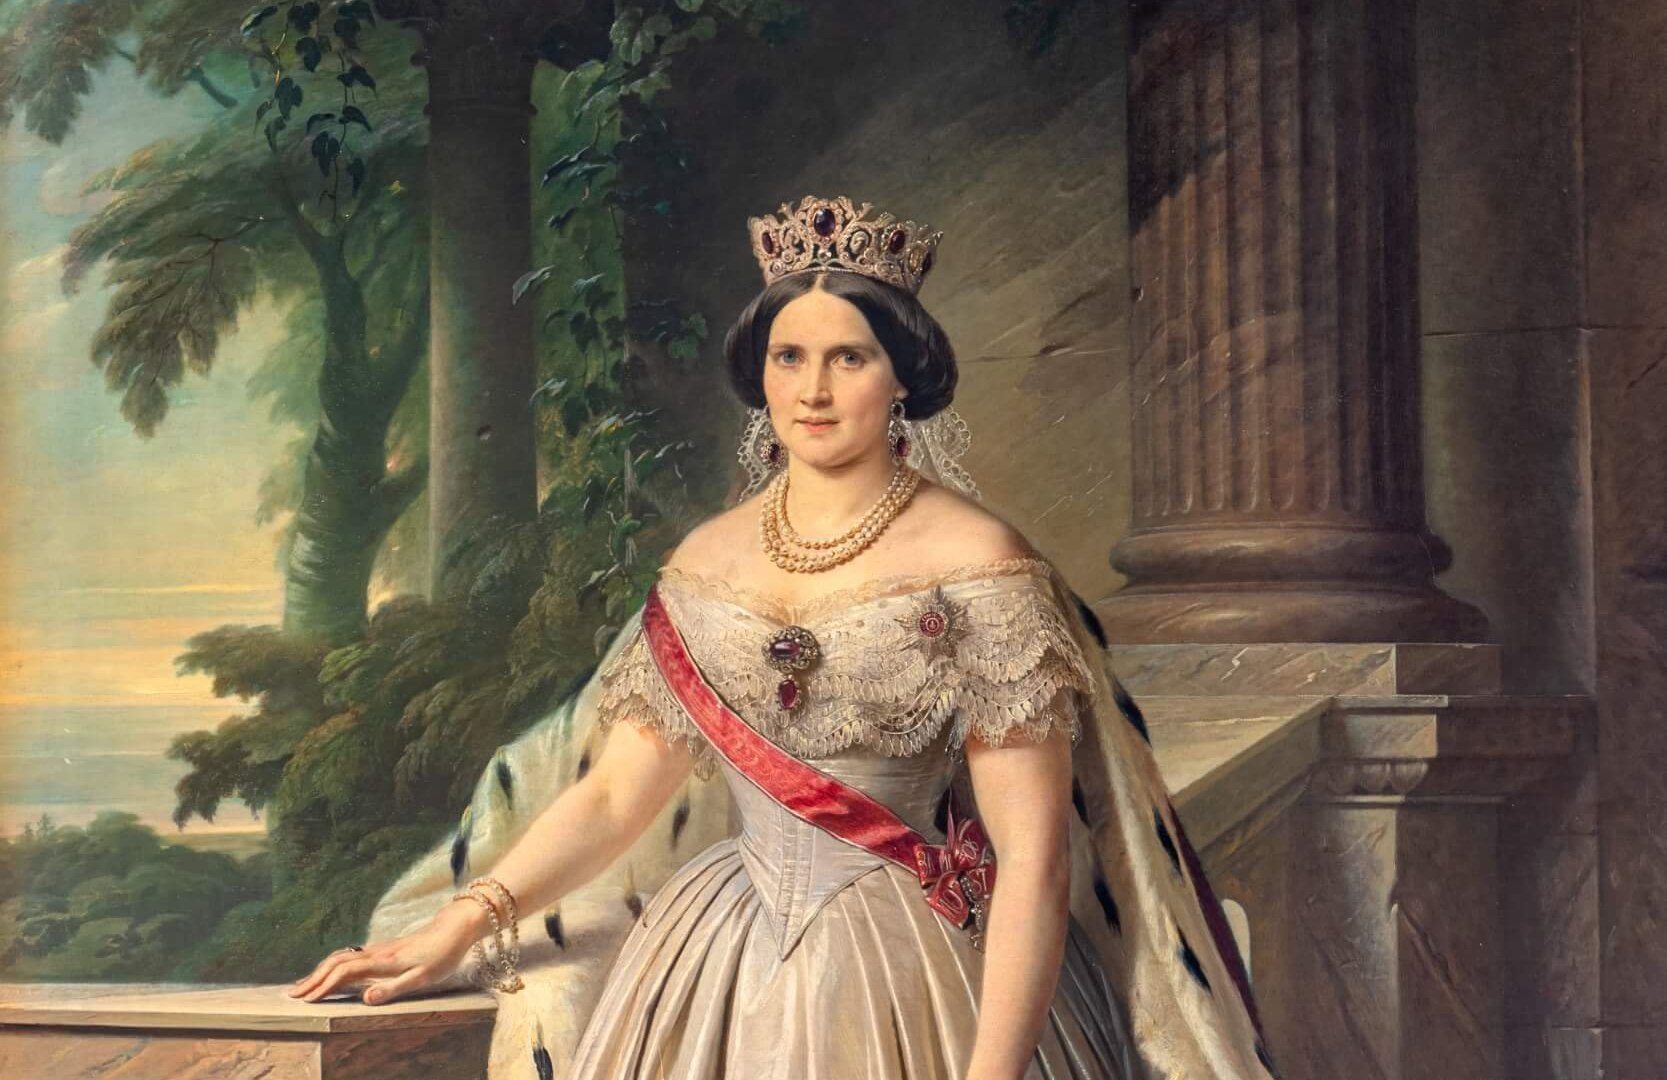 Grand Duchess Auguste was the first of three wives of Grand Duke Friedrich Franz II - she died young, © TMV/Tiemann